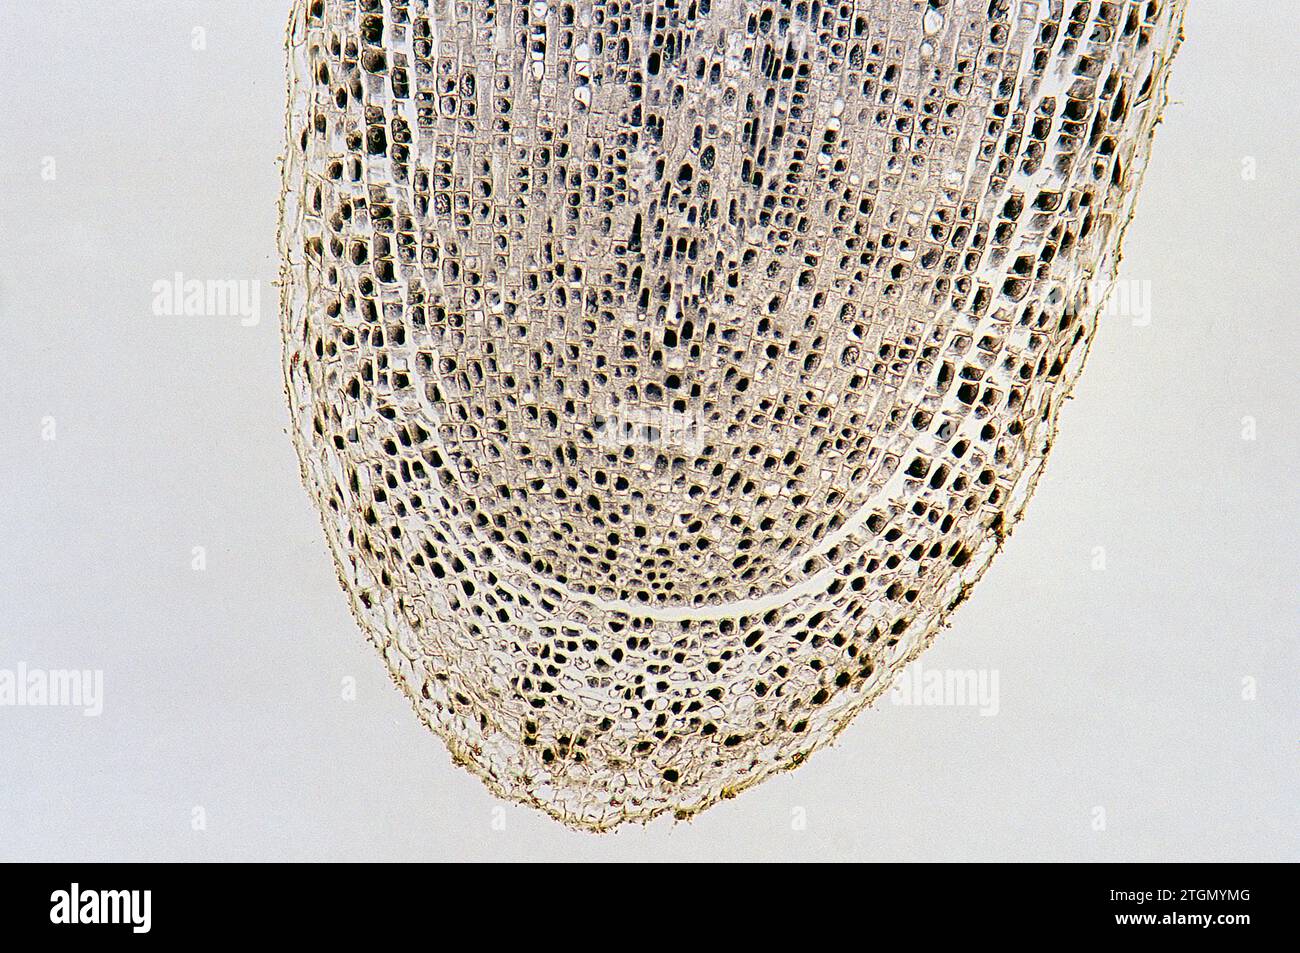 Calyptra or root cap protecting meristematic tissue of onion root. Cells on mitosis. Stock Photo